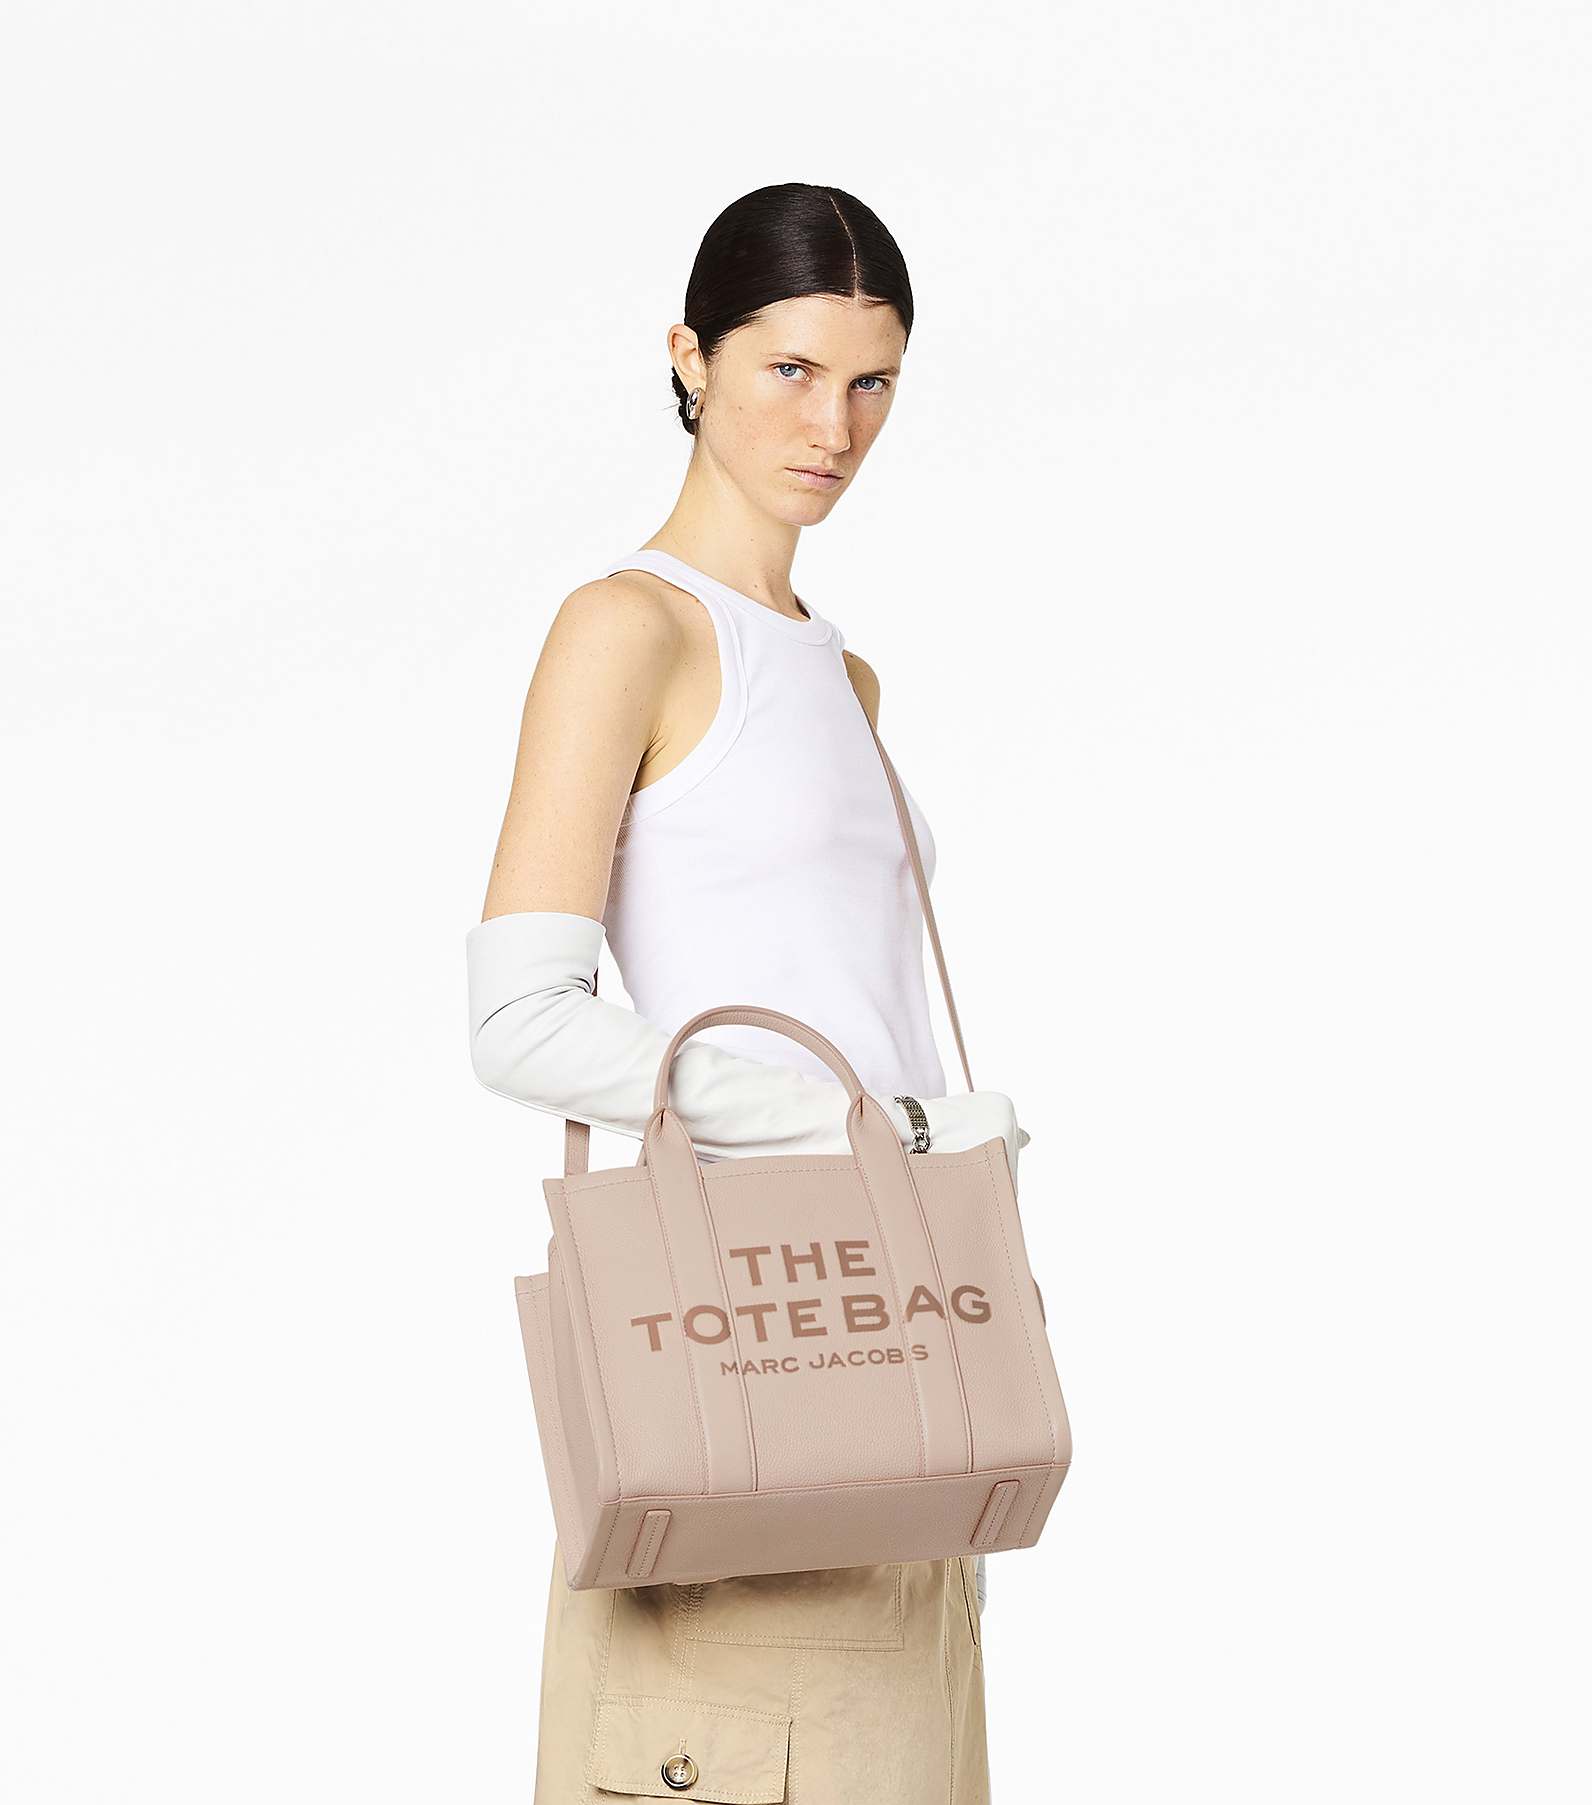 The Leather Medium Tote Bag(The Tote Bag)